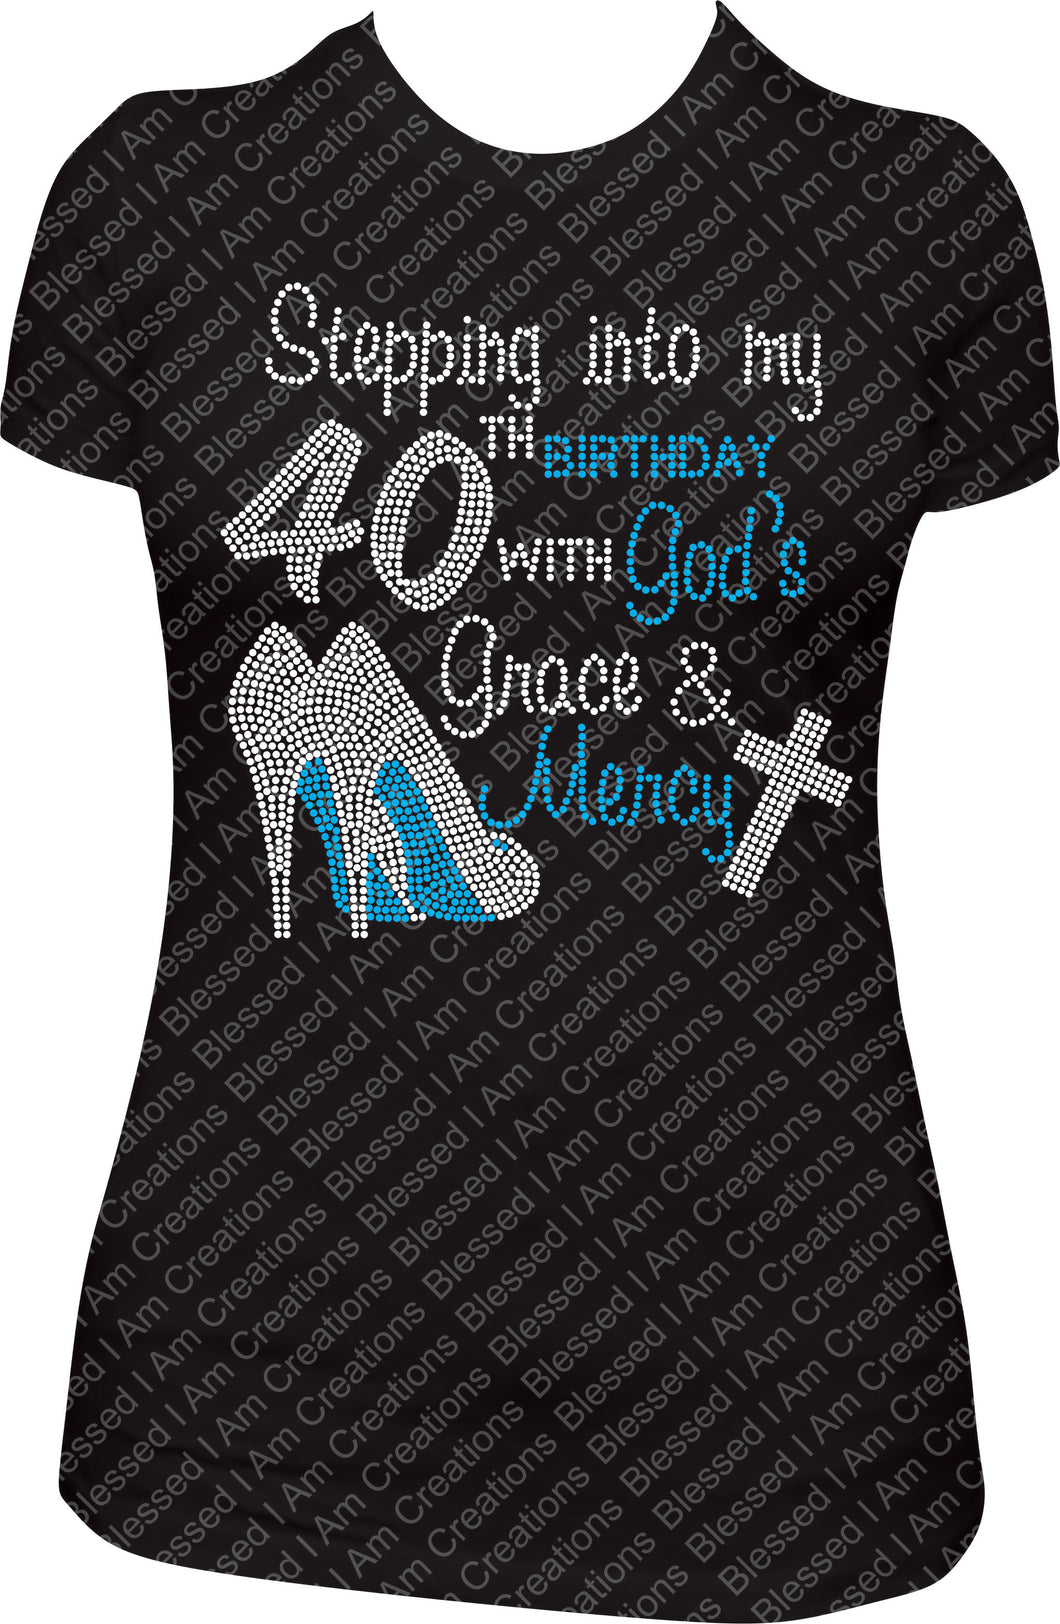 Stepping into my 40th Birthday with God's Grace and Mercy Rhinestone Shirt Bling Shirt